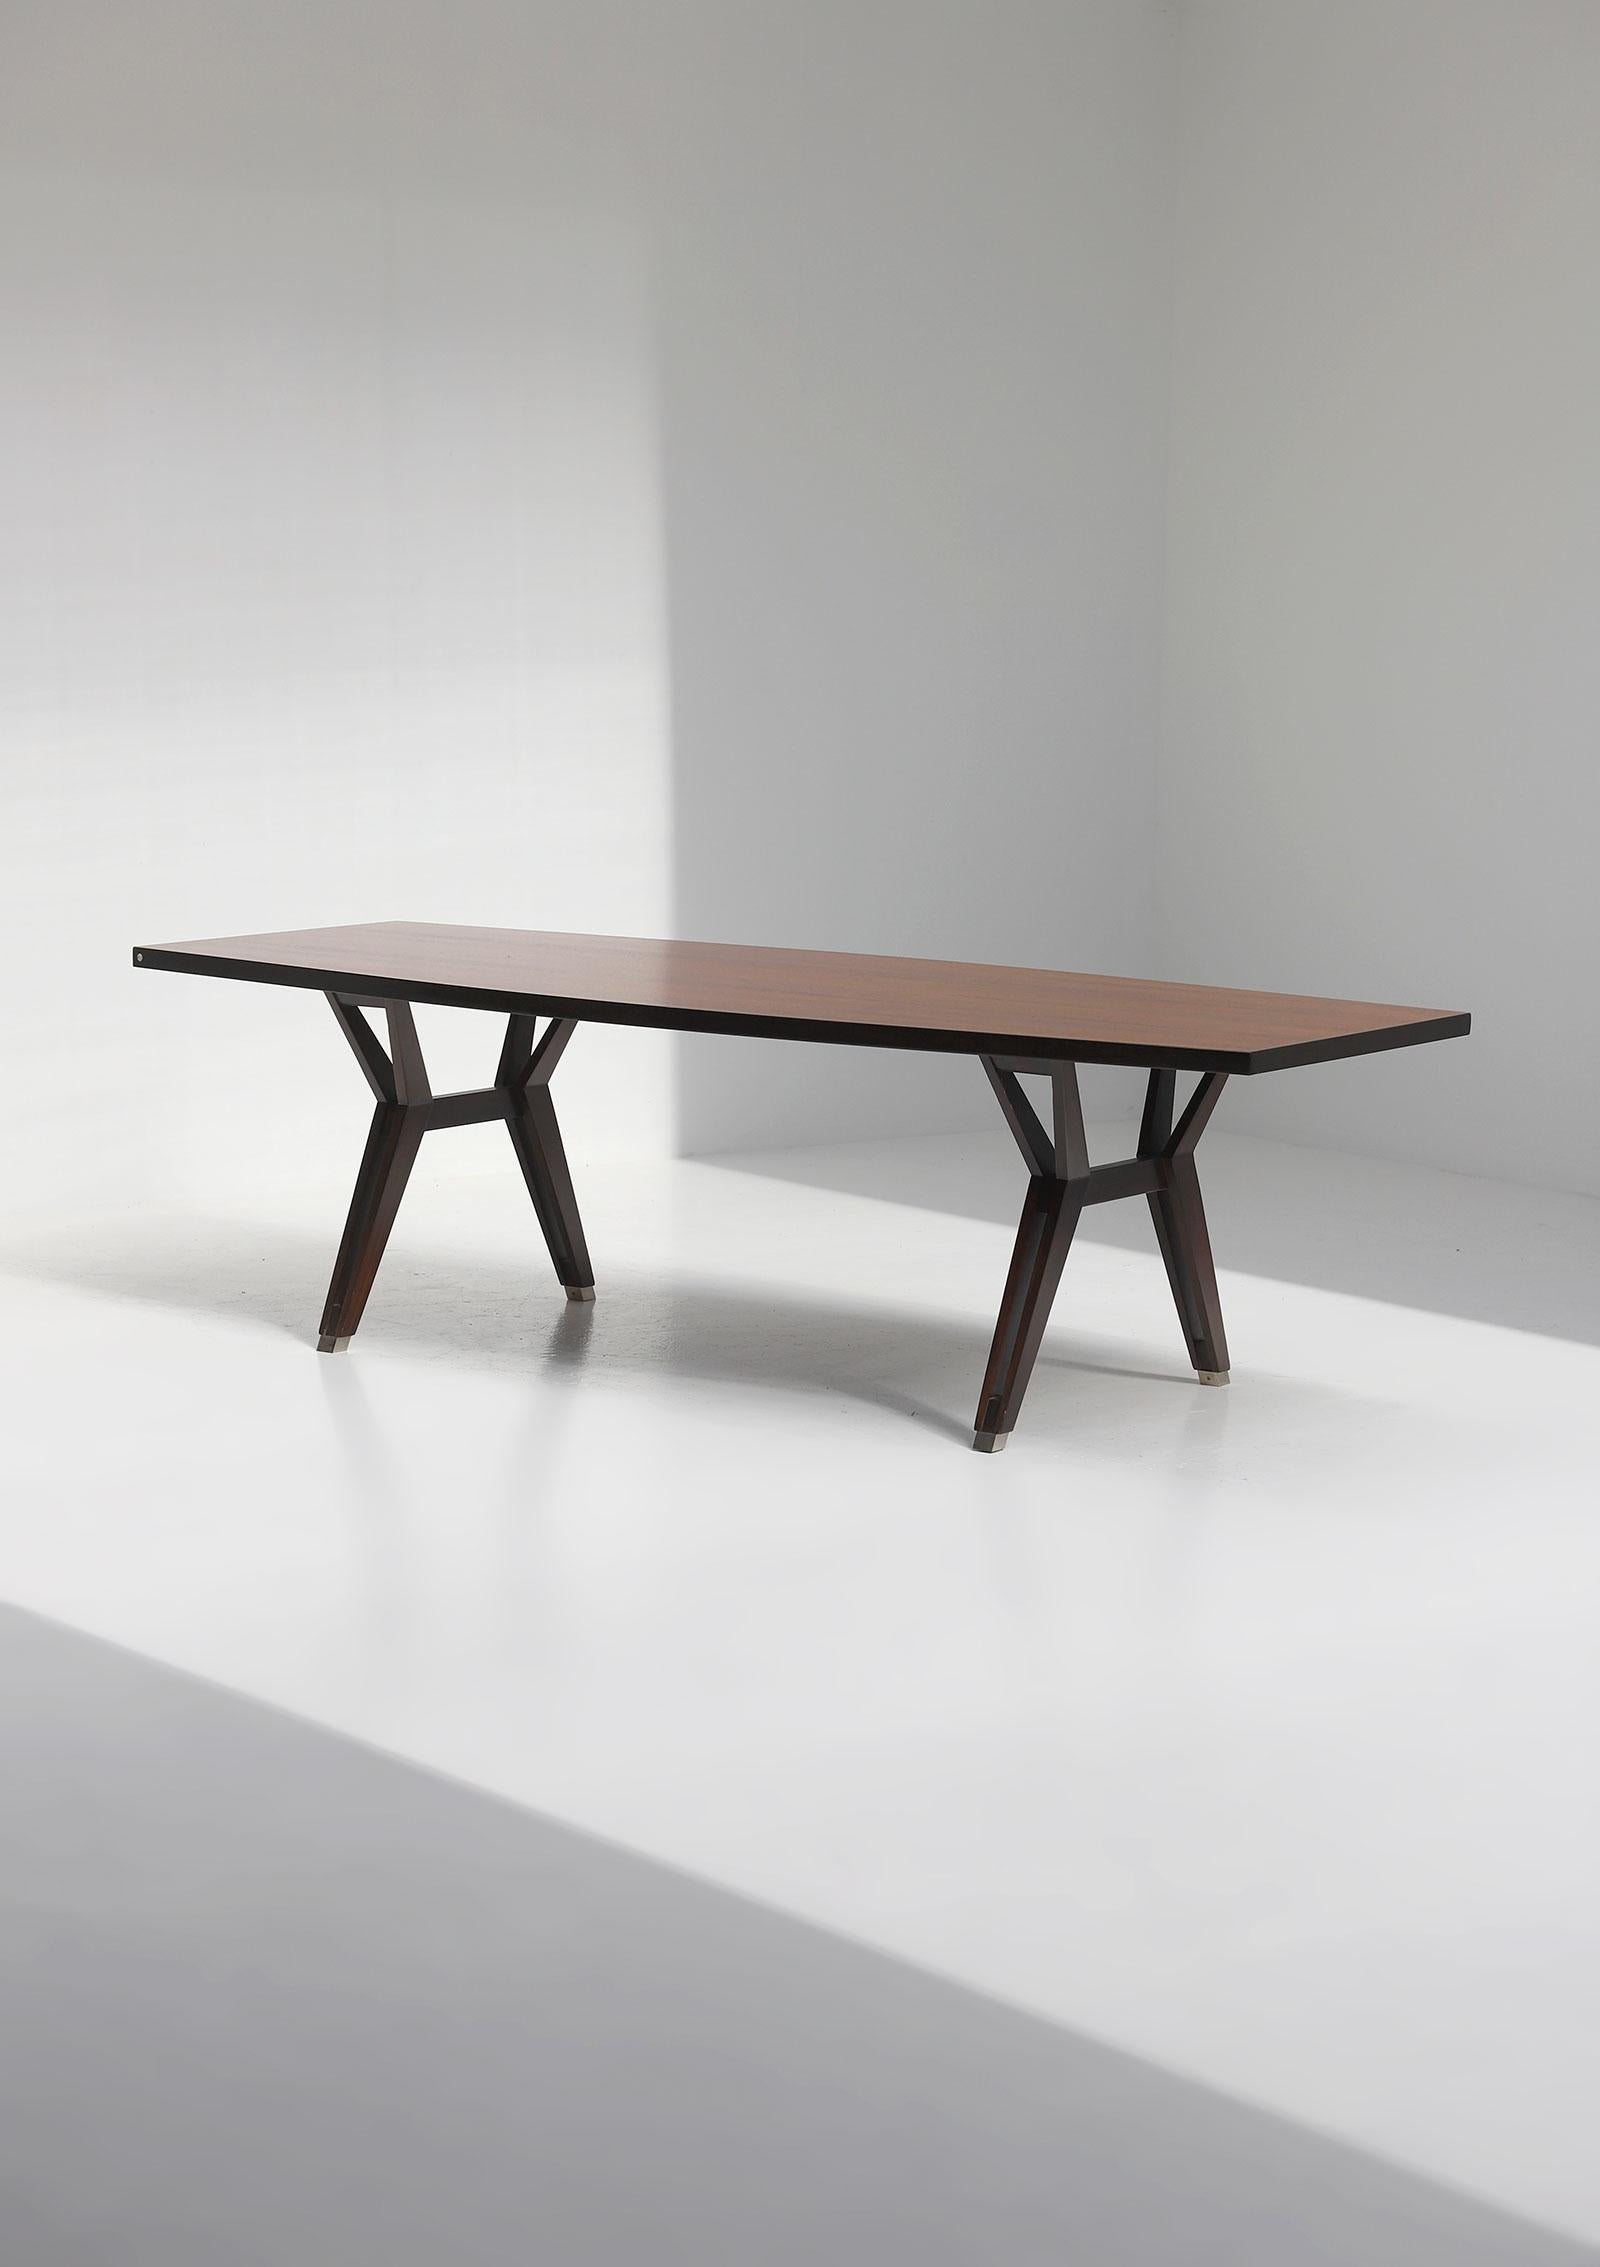 This rare dining / conference table has been designed in the late 50s and produced by MIM - Mobili Italiani Moderni Furniture. The exclusivity of this table is due to its boat shaped table top and material use. Eye catcher are the aluminum feet who